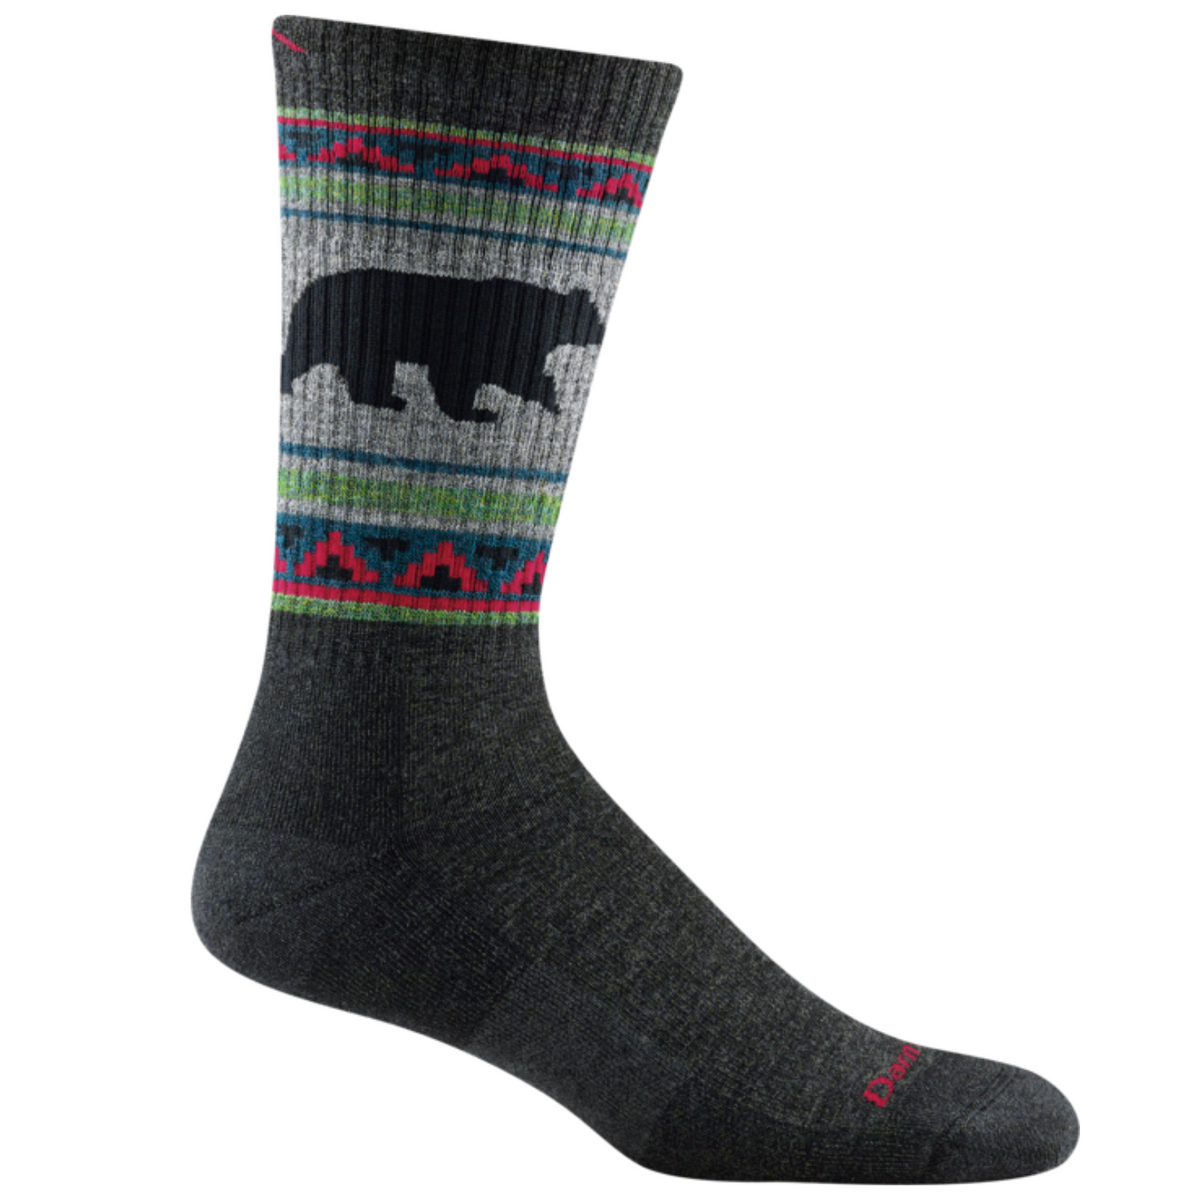 Darn Tough 1980 VanGrizzle Hiker Boot with Full Cushion Midweight Men&#39;s Crew Sock featuring charcoal sock with gray, green, red, and blue pattern around ankle with black bear. Sock shown on display foot. 